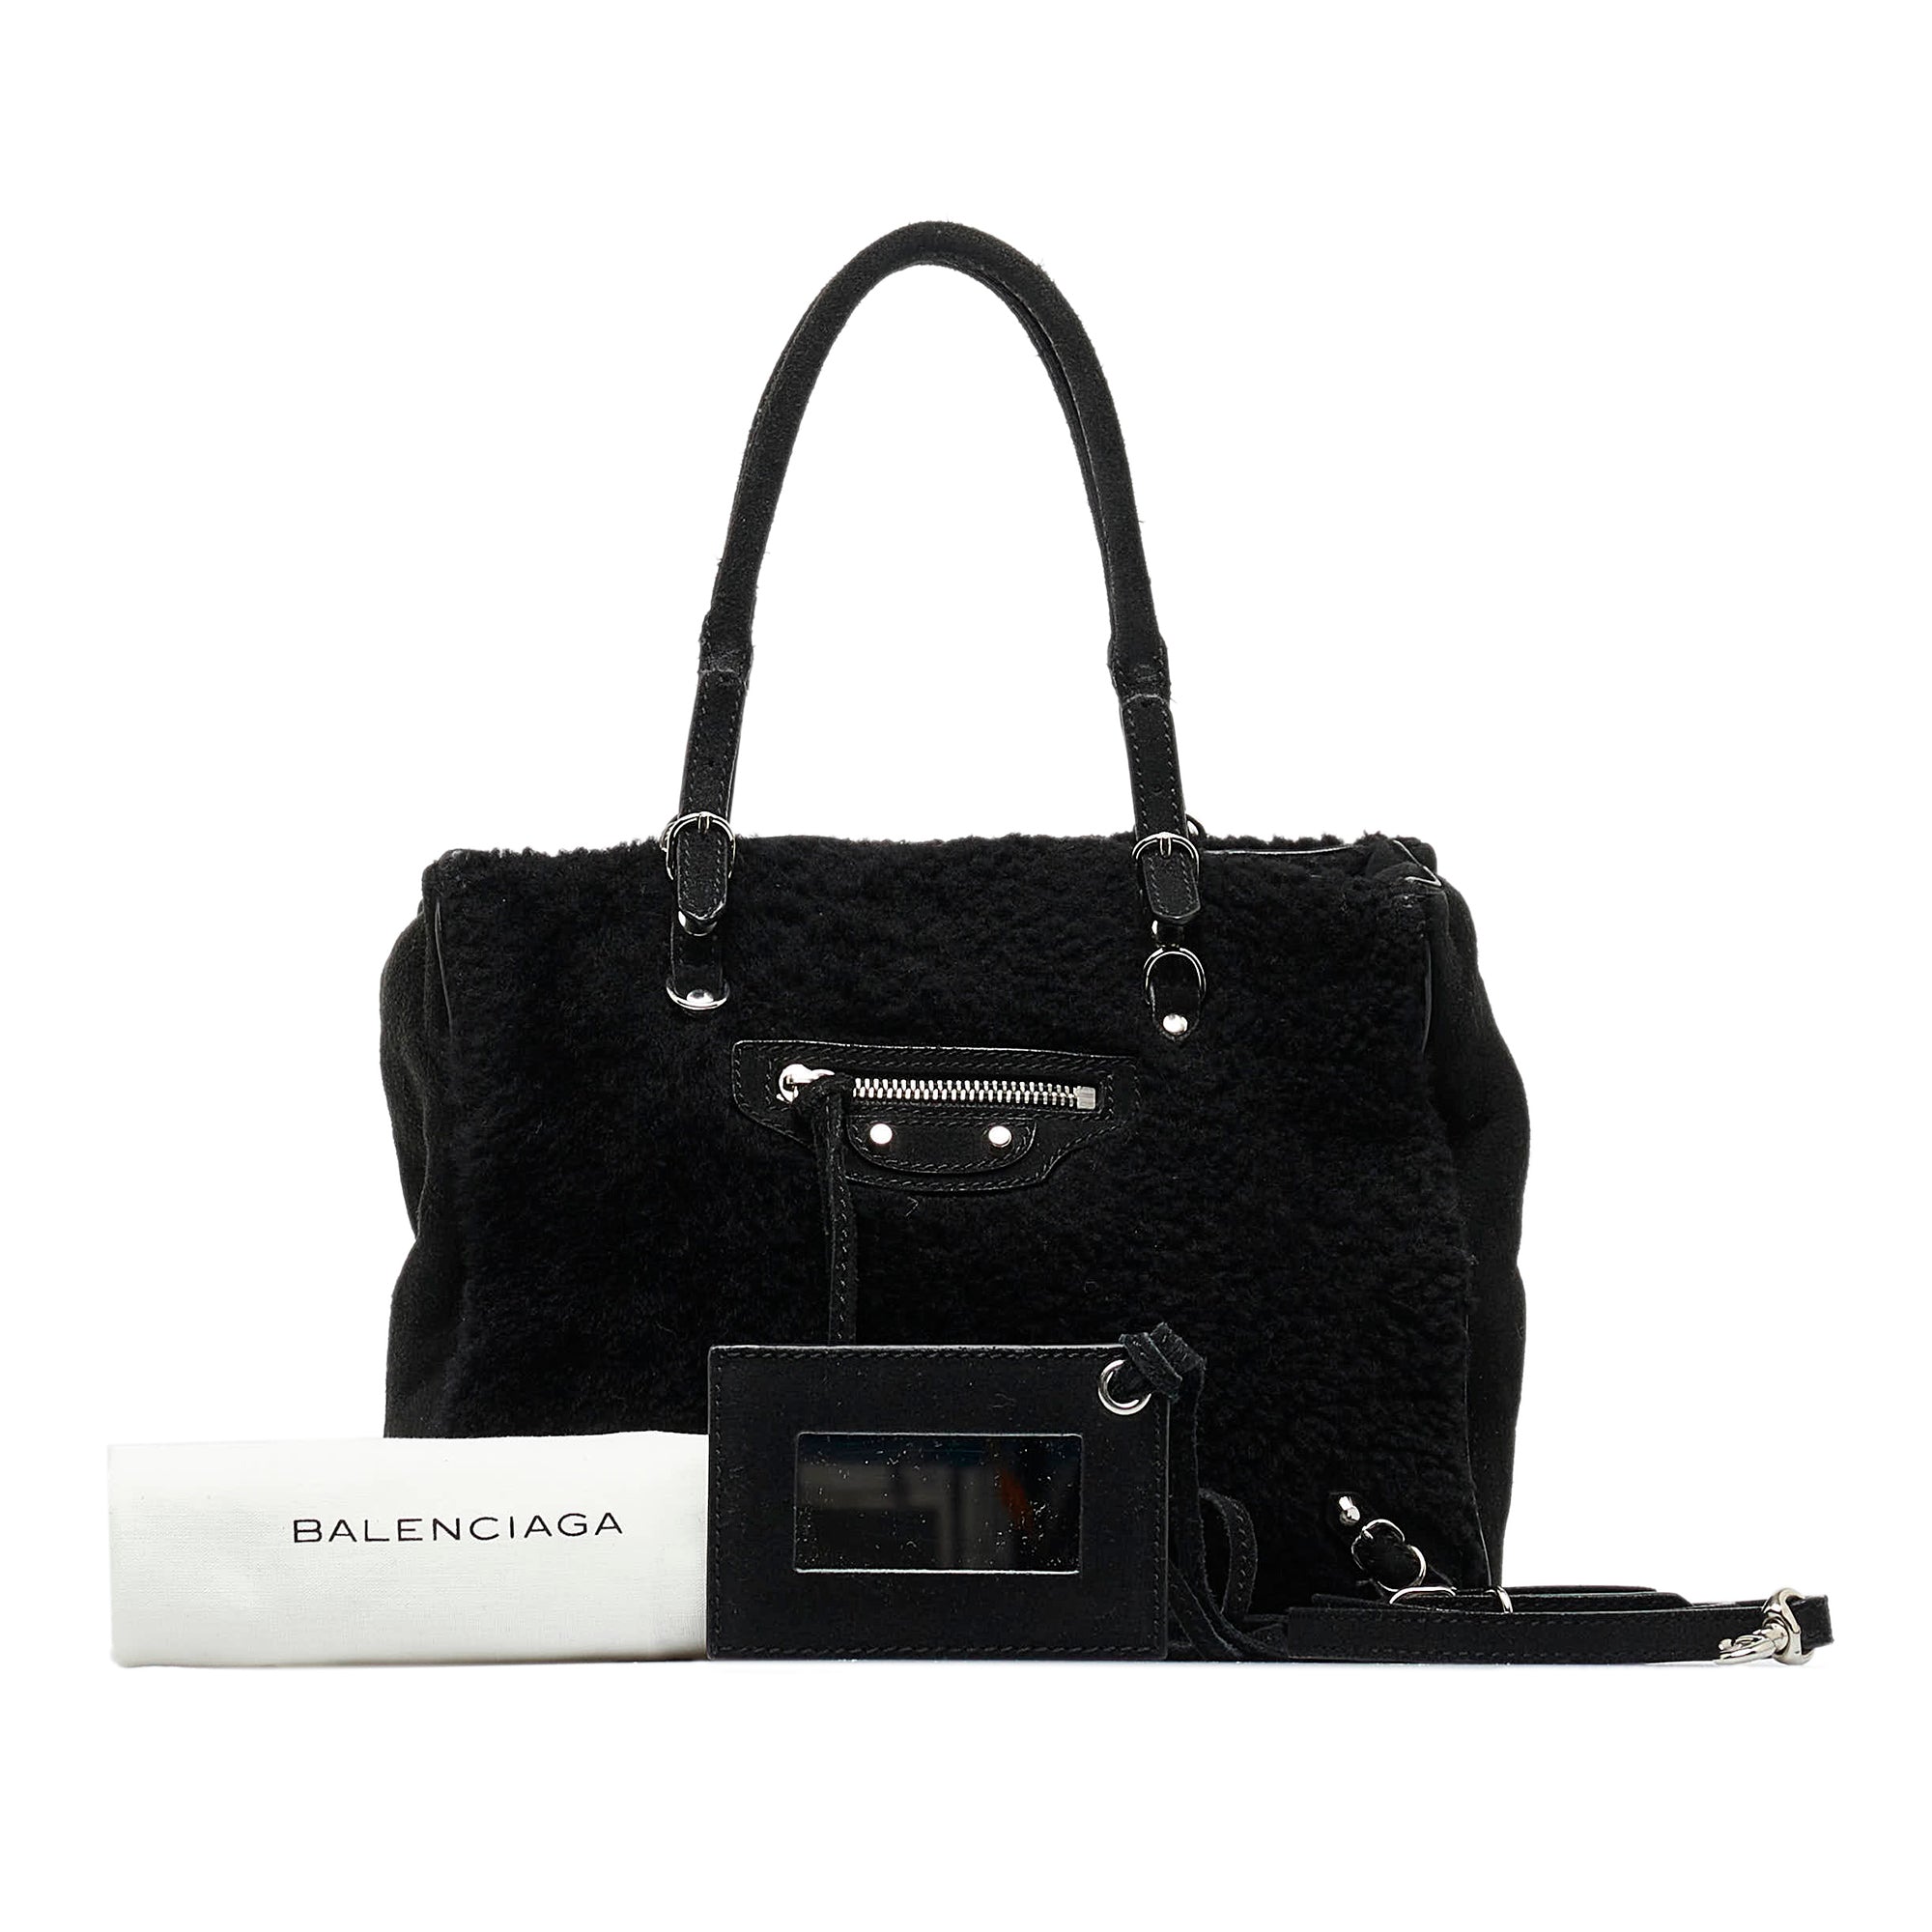 Balenciaga - Authenticated Travel Bag - Leather Black Plain for Women, Never Worn